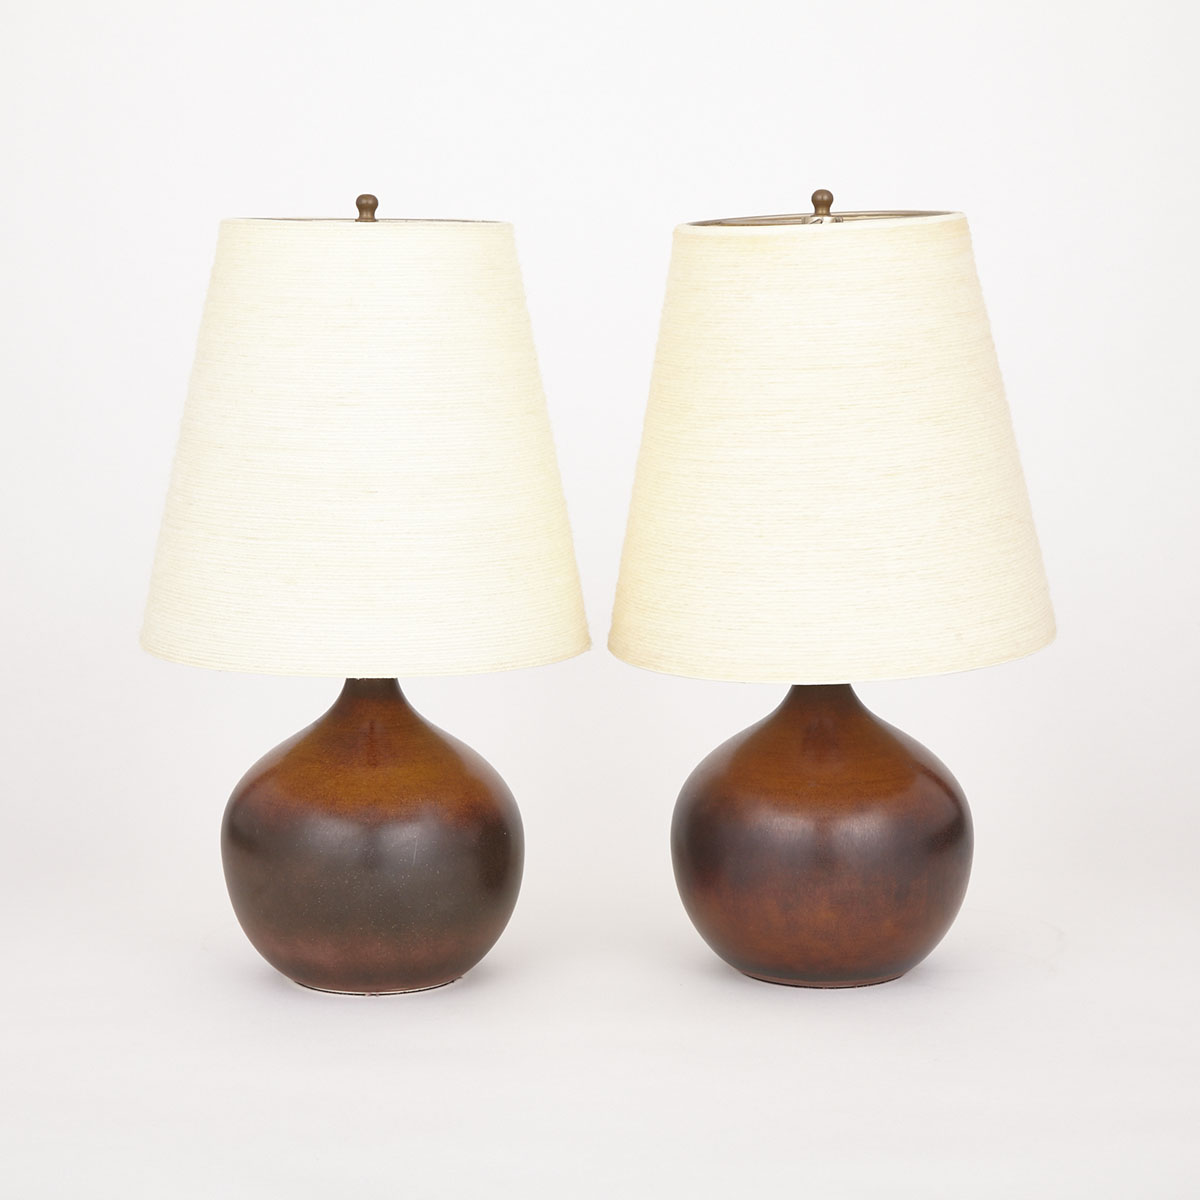 Pair of Lotte & Gunnar Bostlund Ceramic Bedside Table Lamps with Original Wool Wrapped Fiberglass Shades, mid 20th century